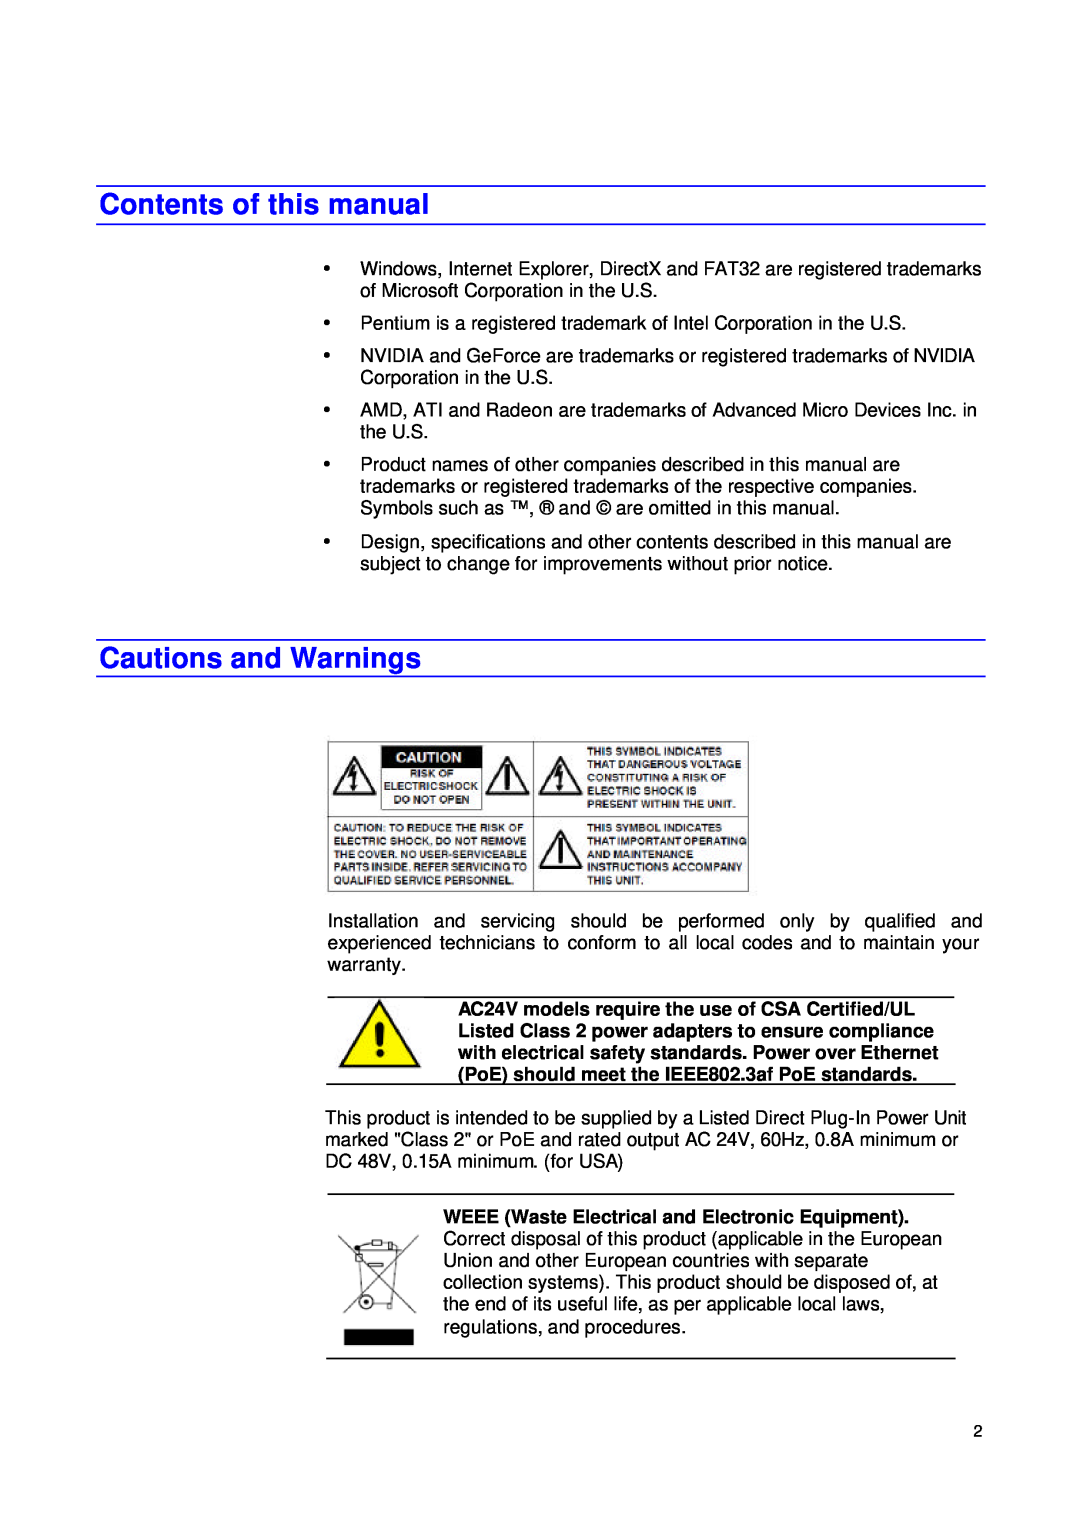 JVC VN-T216VPRU Contents of this manual, Cautions and Warnings 